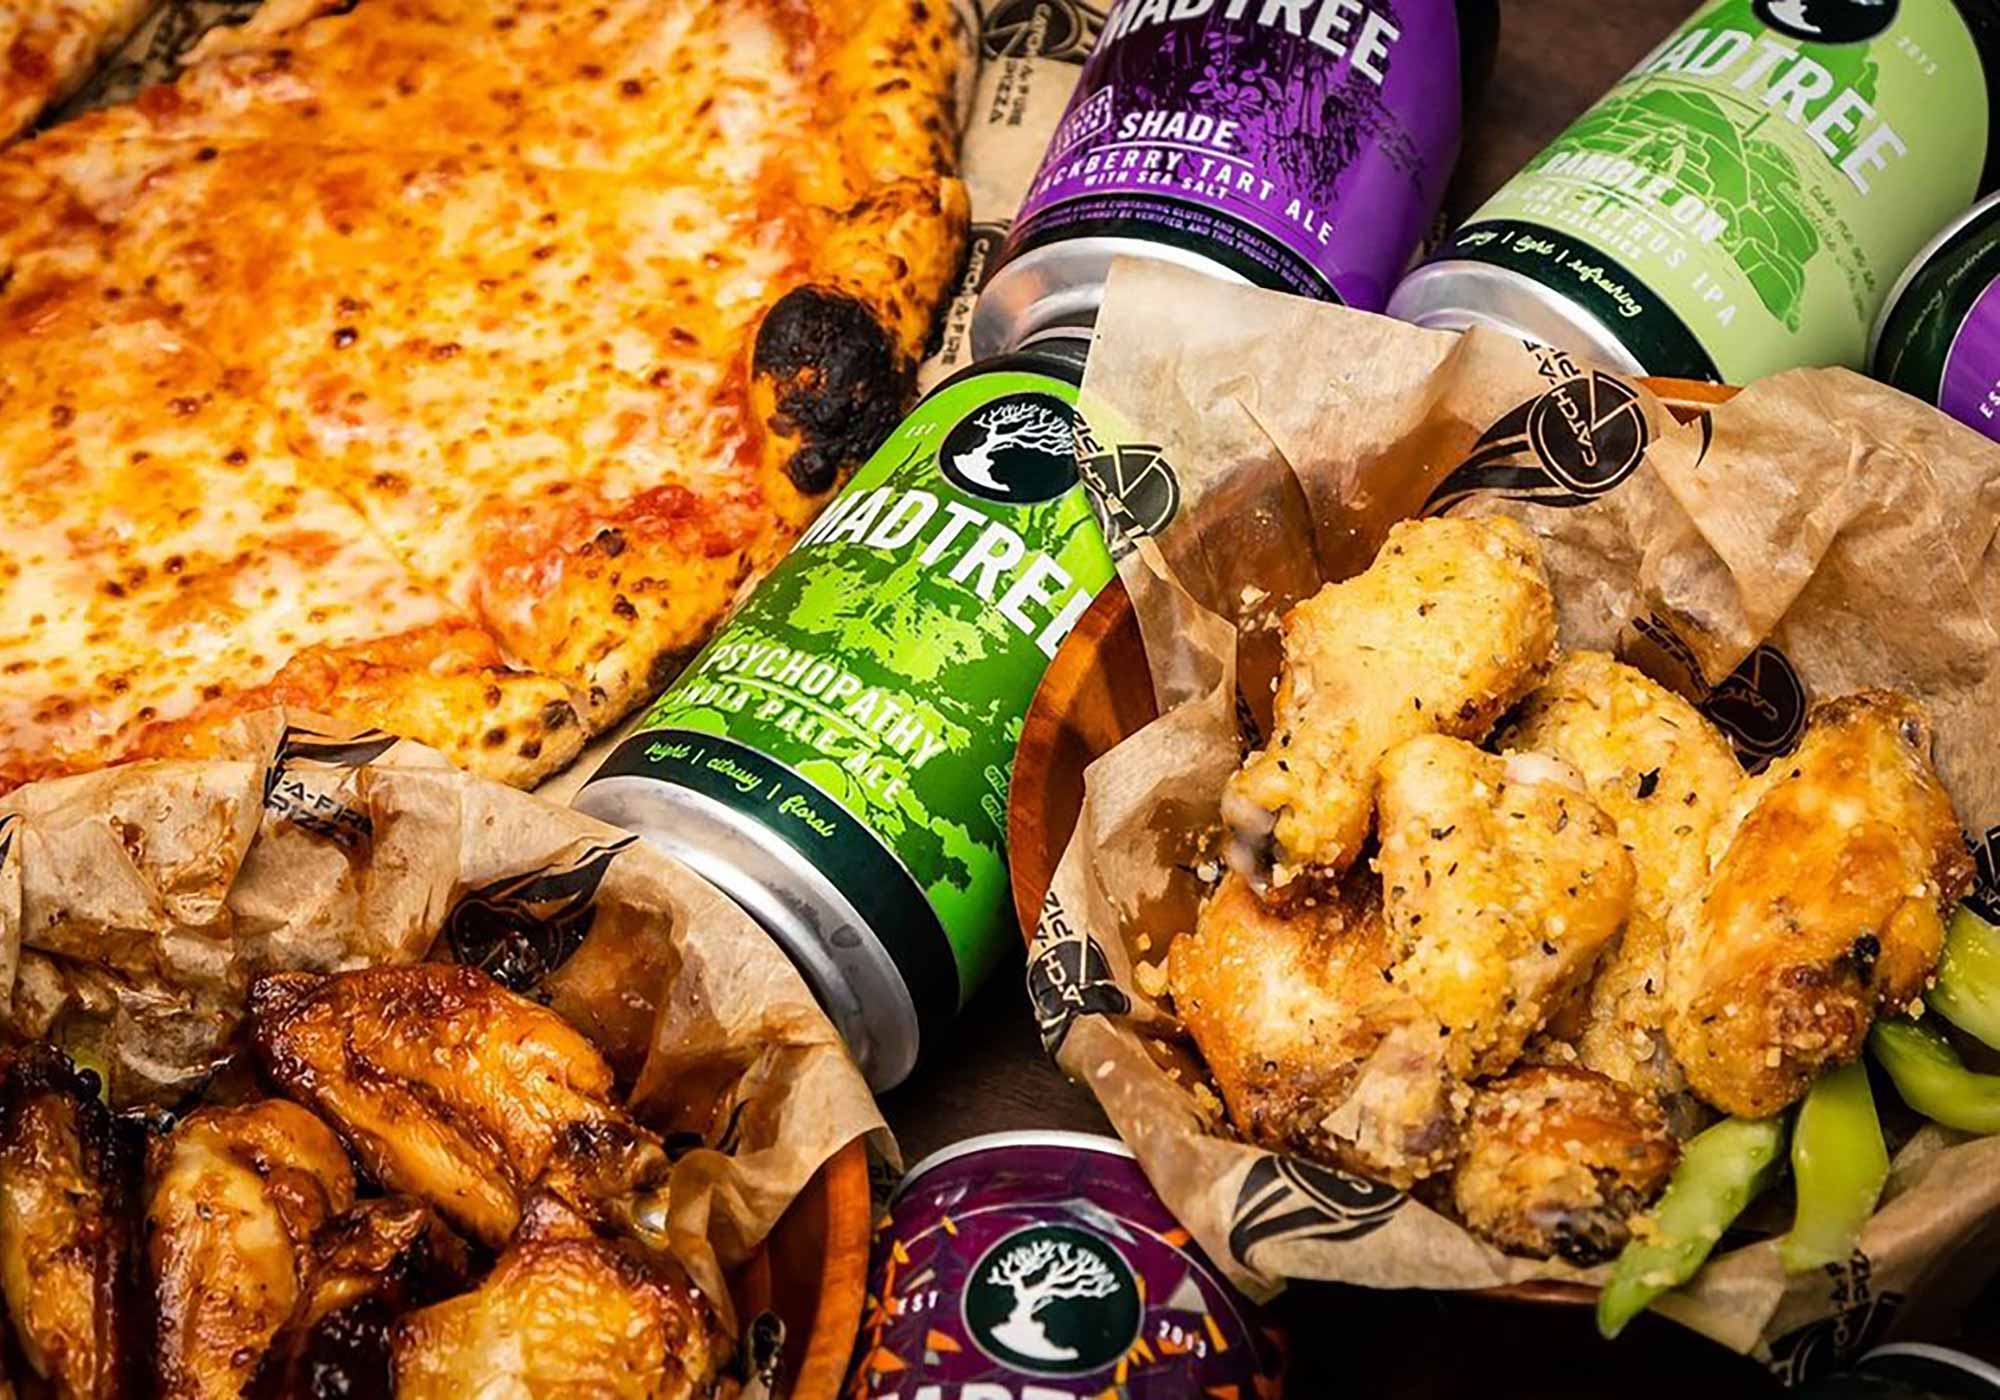 The Perfect Beer and Snack Pairings For That Big Game